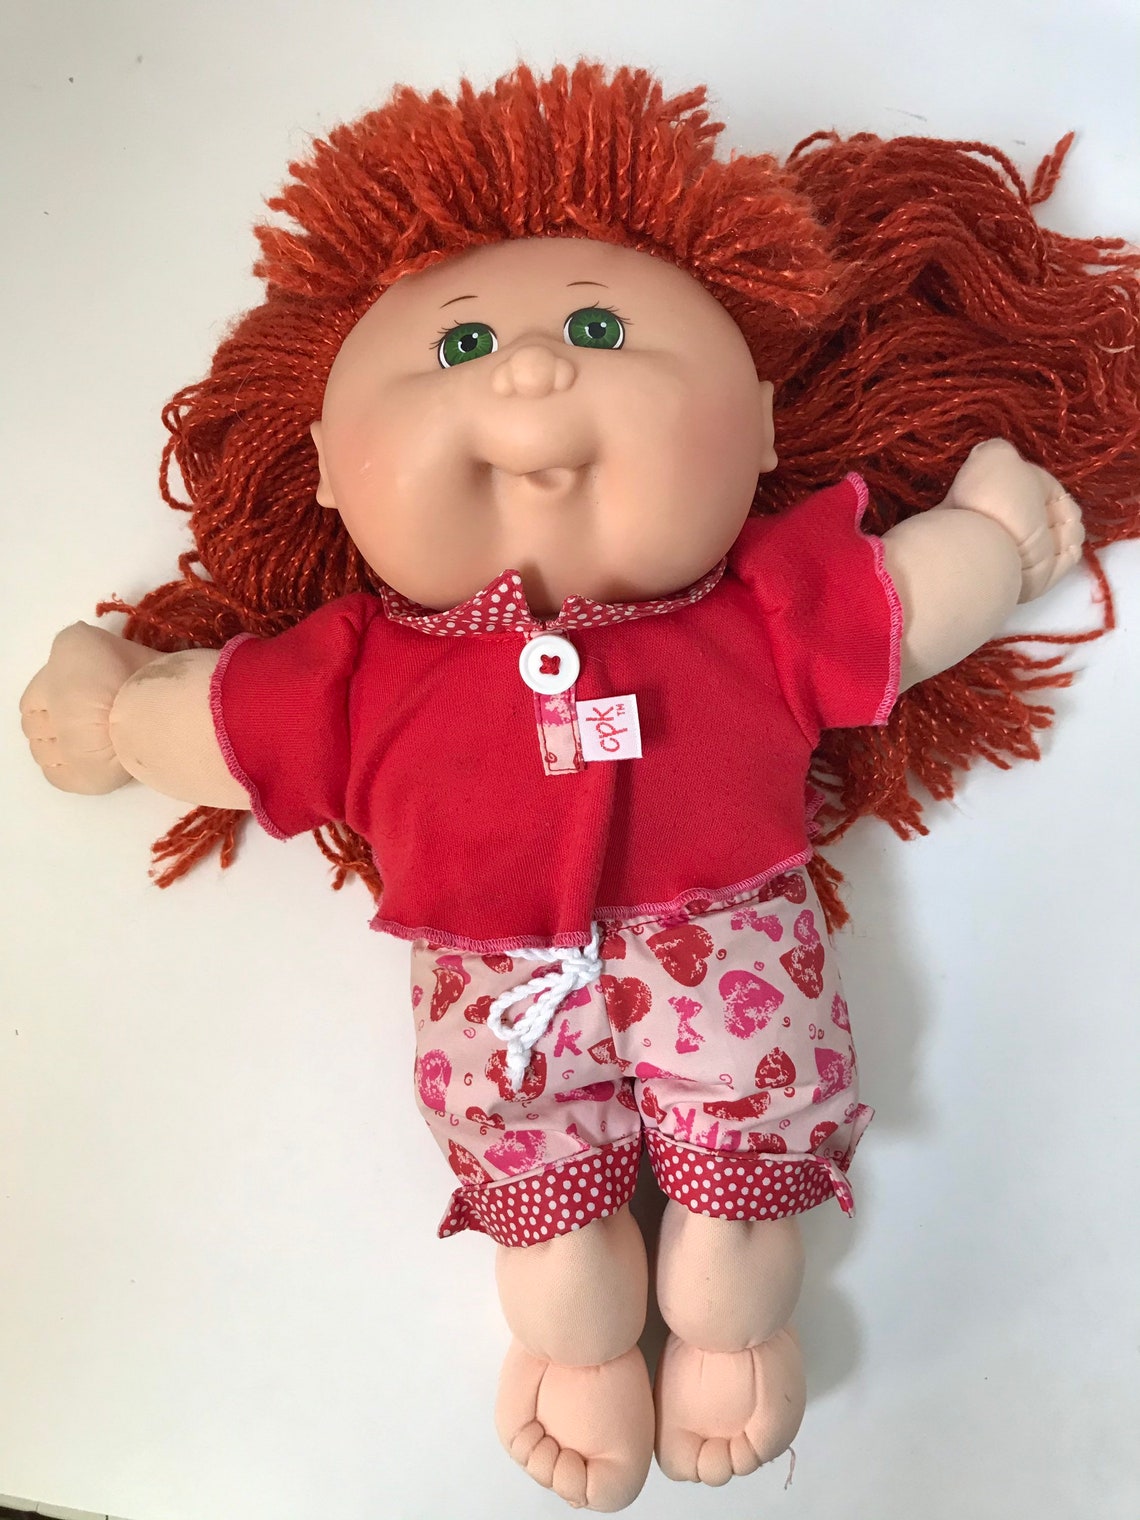 Red Head Cabbage Patch Doll - How To Blog